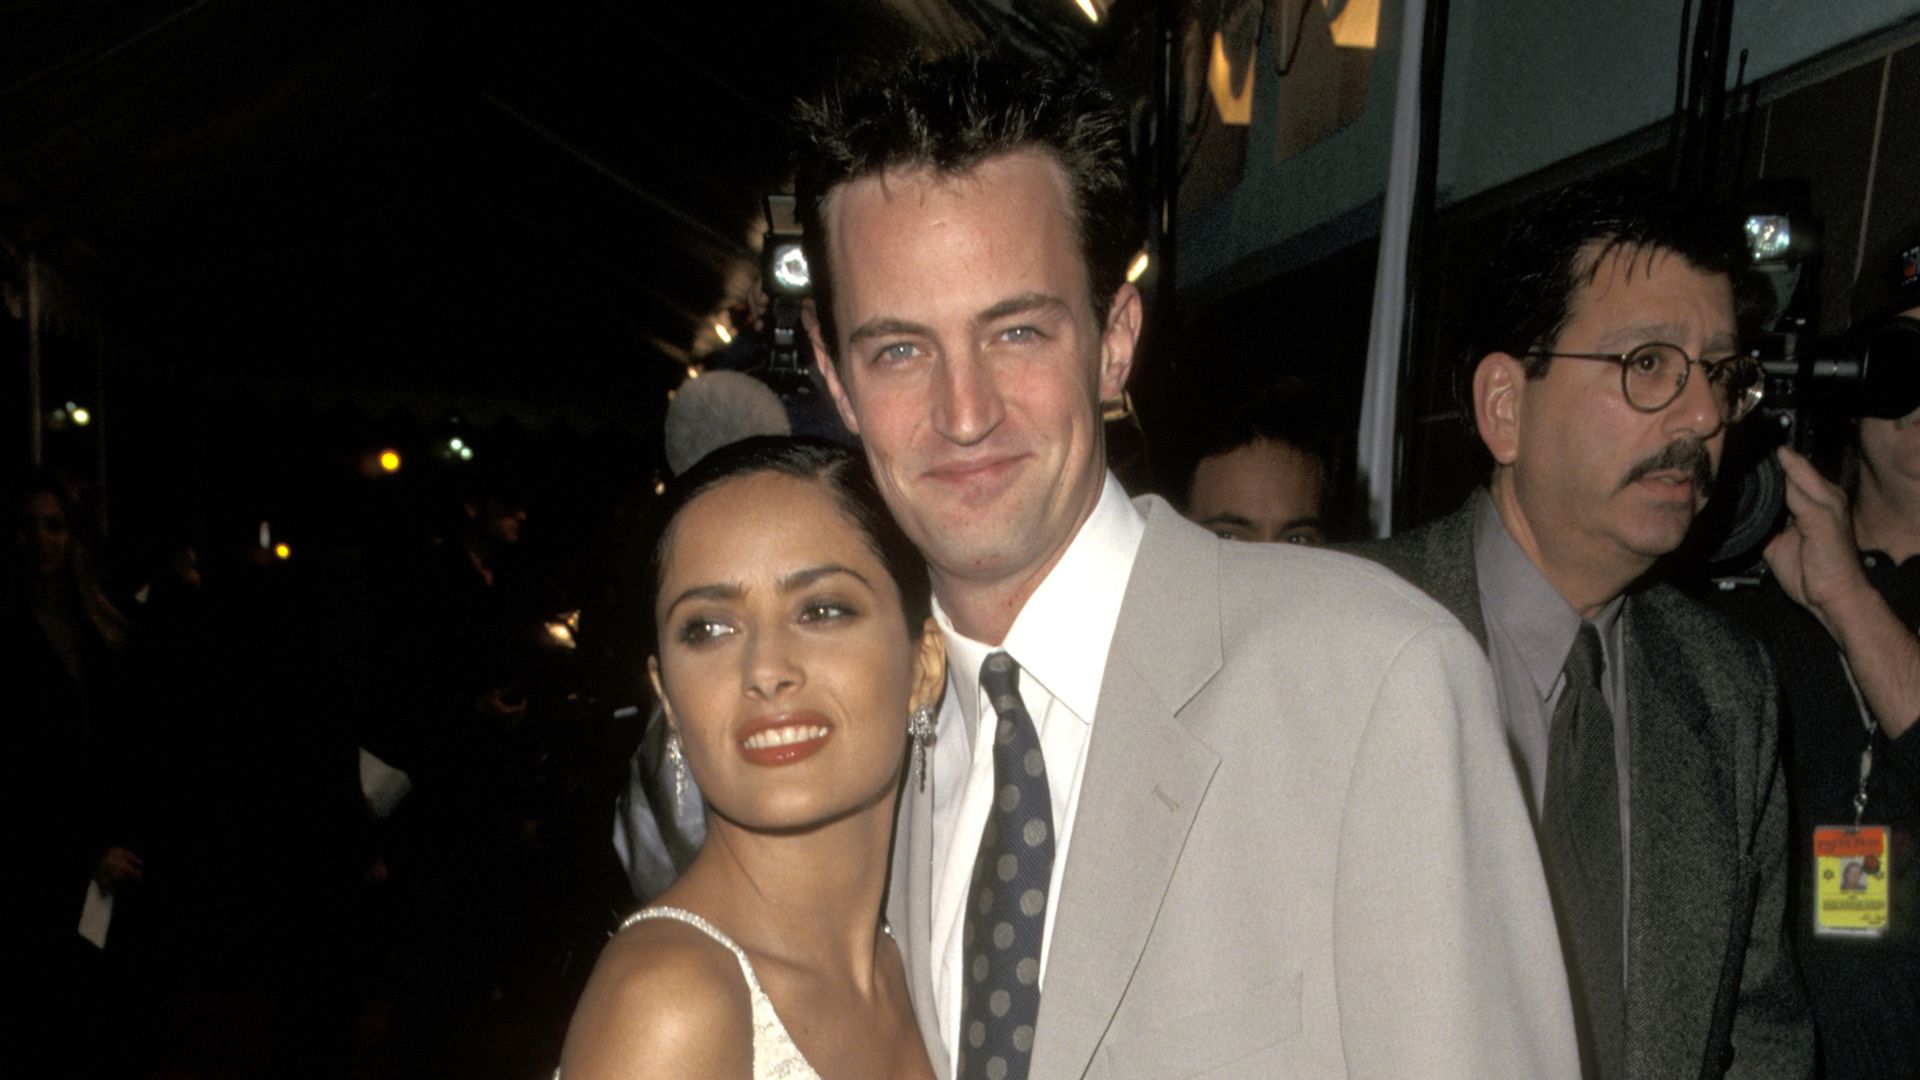 Salma Hayek and Matthew Perry at the Fools Rush in premiere in los Angeles on February 11, 1997